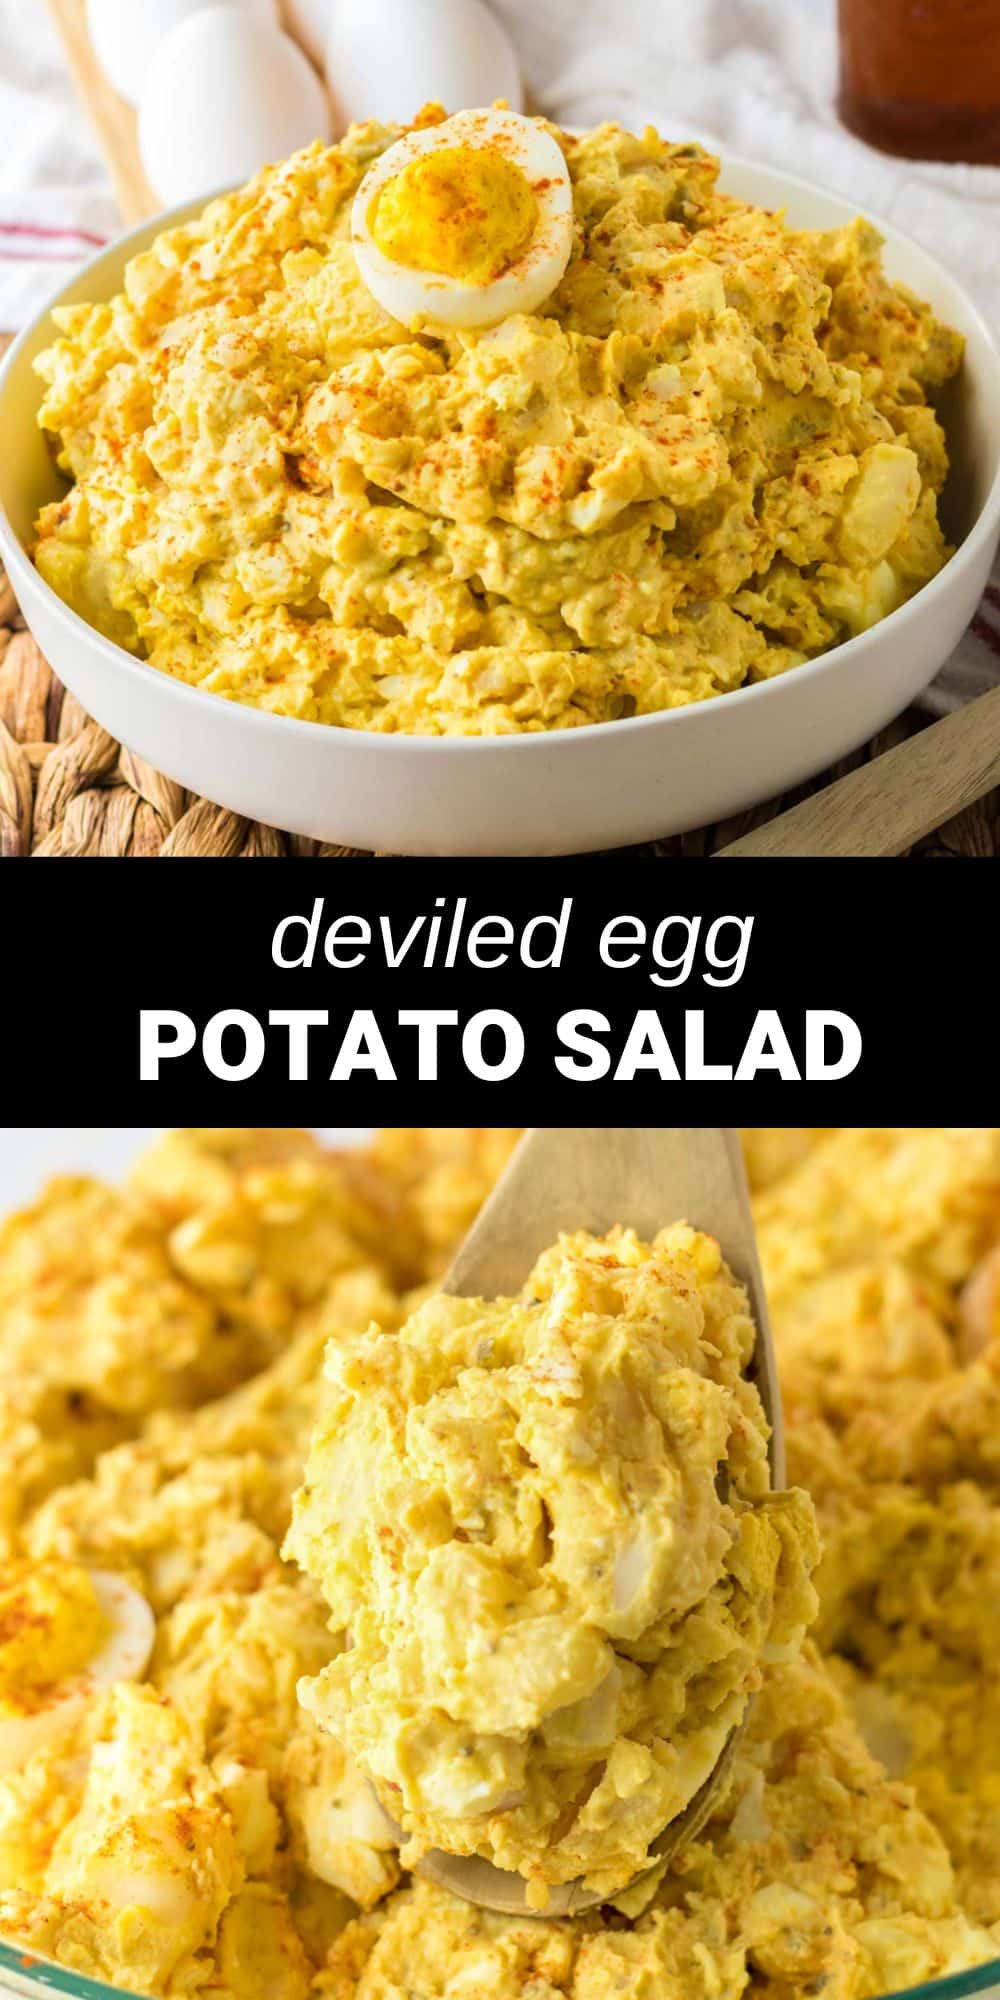 This Deviled Egg Potato Salad is the perfect potluck side dish! Every cookout needspotato salads and of course deviled eggs and this potato salad combines both in one delicious salad!